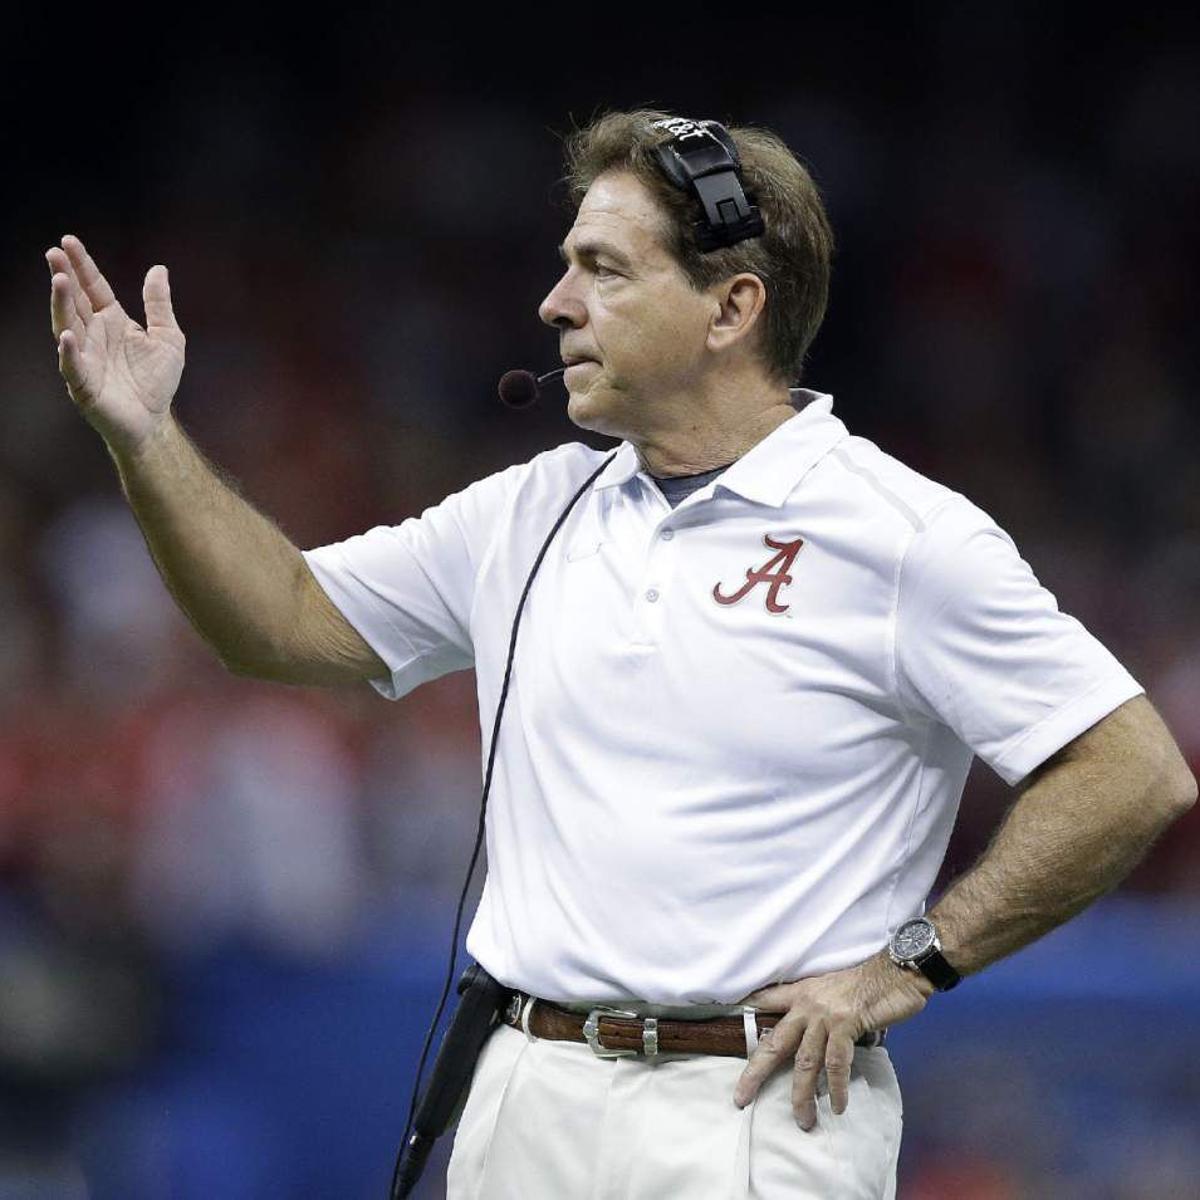 Alabama coach Nick Saban on signing troubled player now kicked off team:  'We're not apologizing for what we did' | Sports 